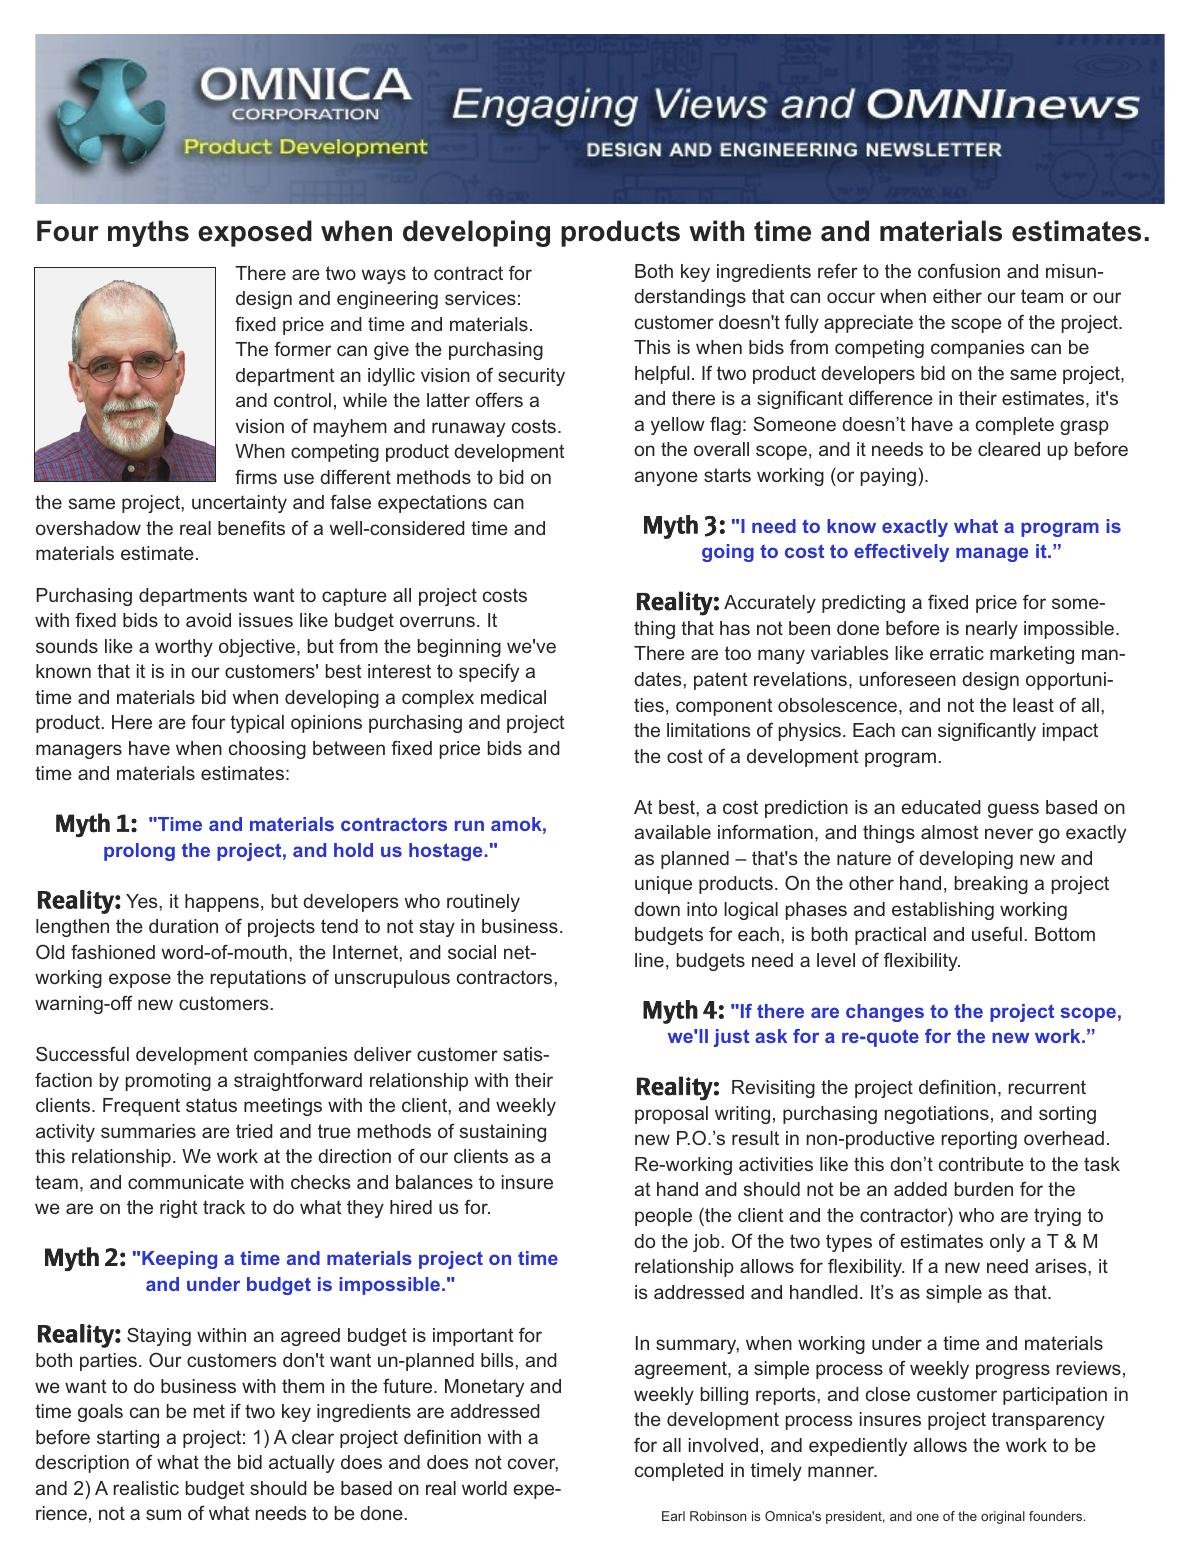 Four myths exposed when developing products with time and material estimates.